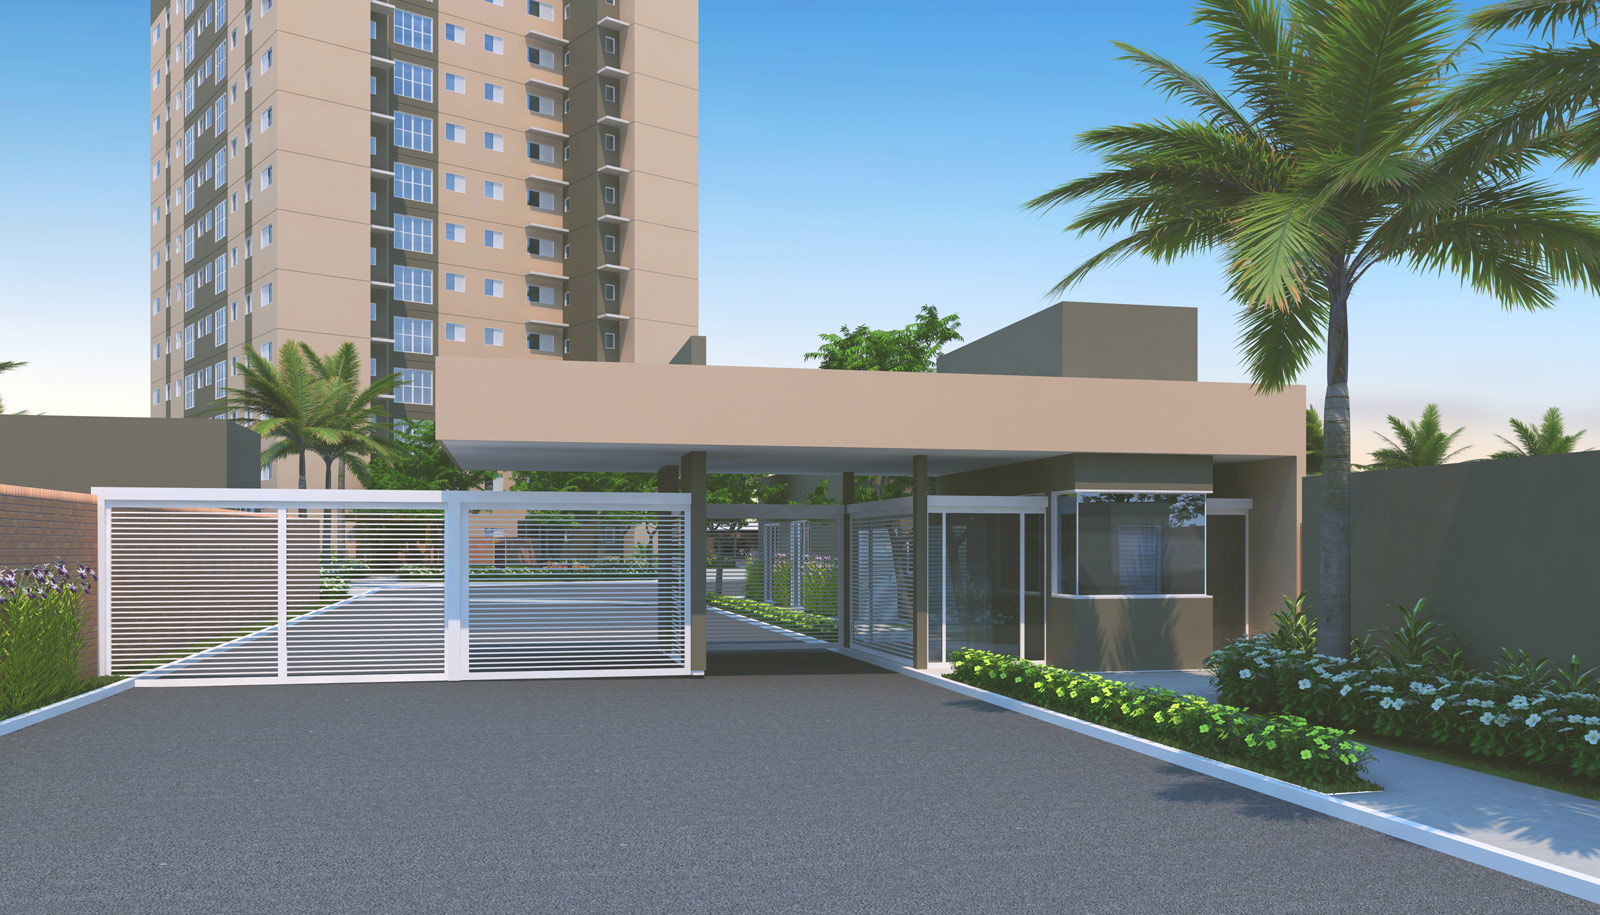 Residencial Ouro Verde